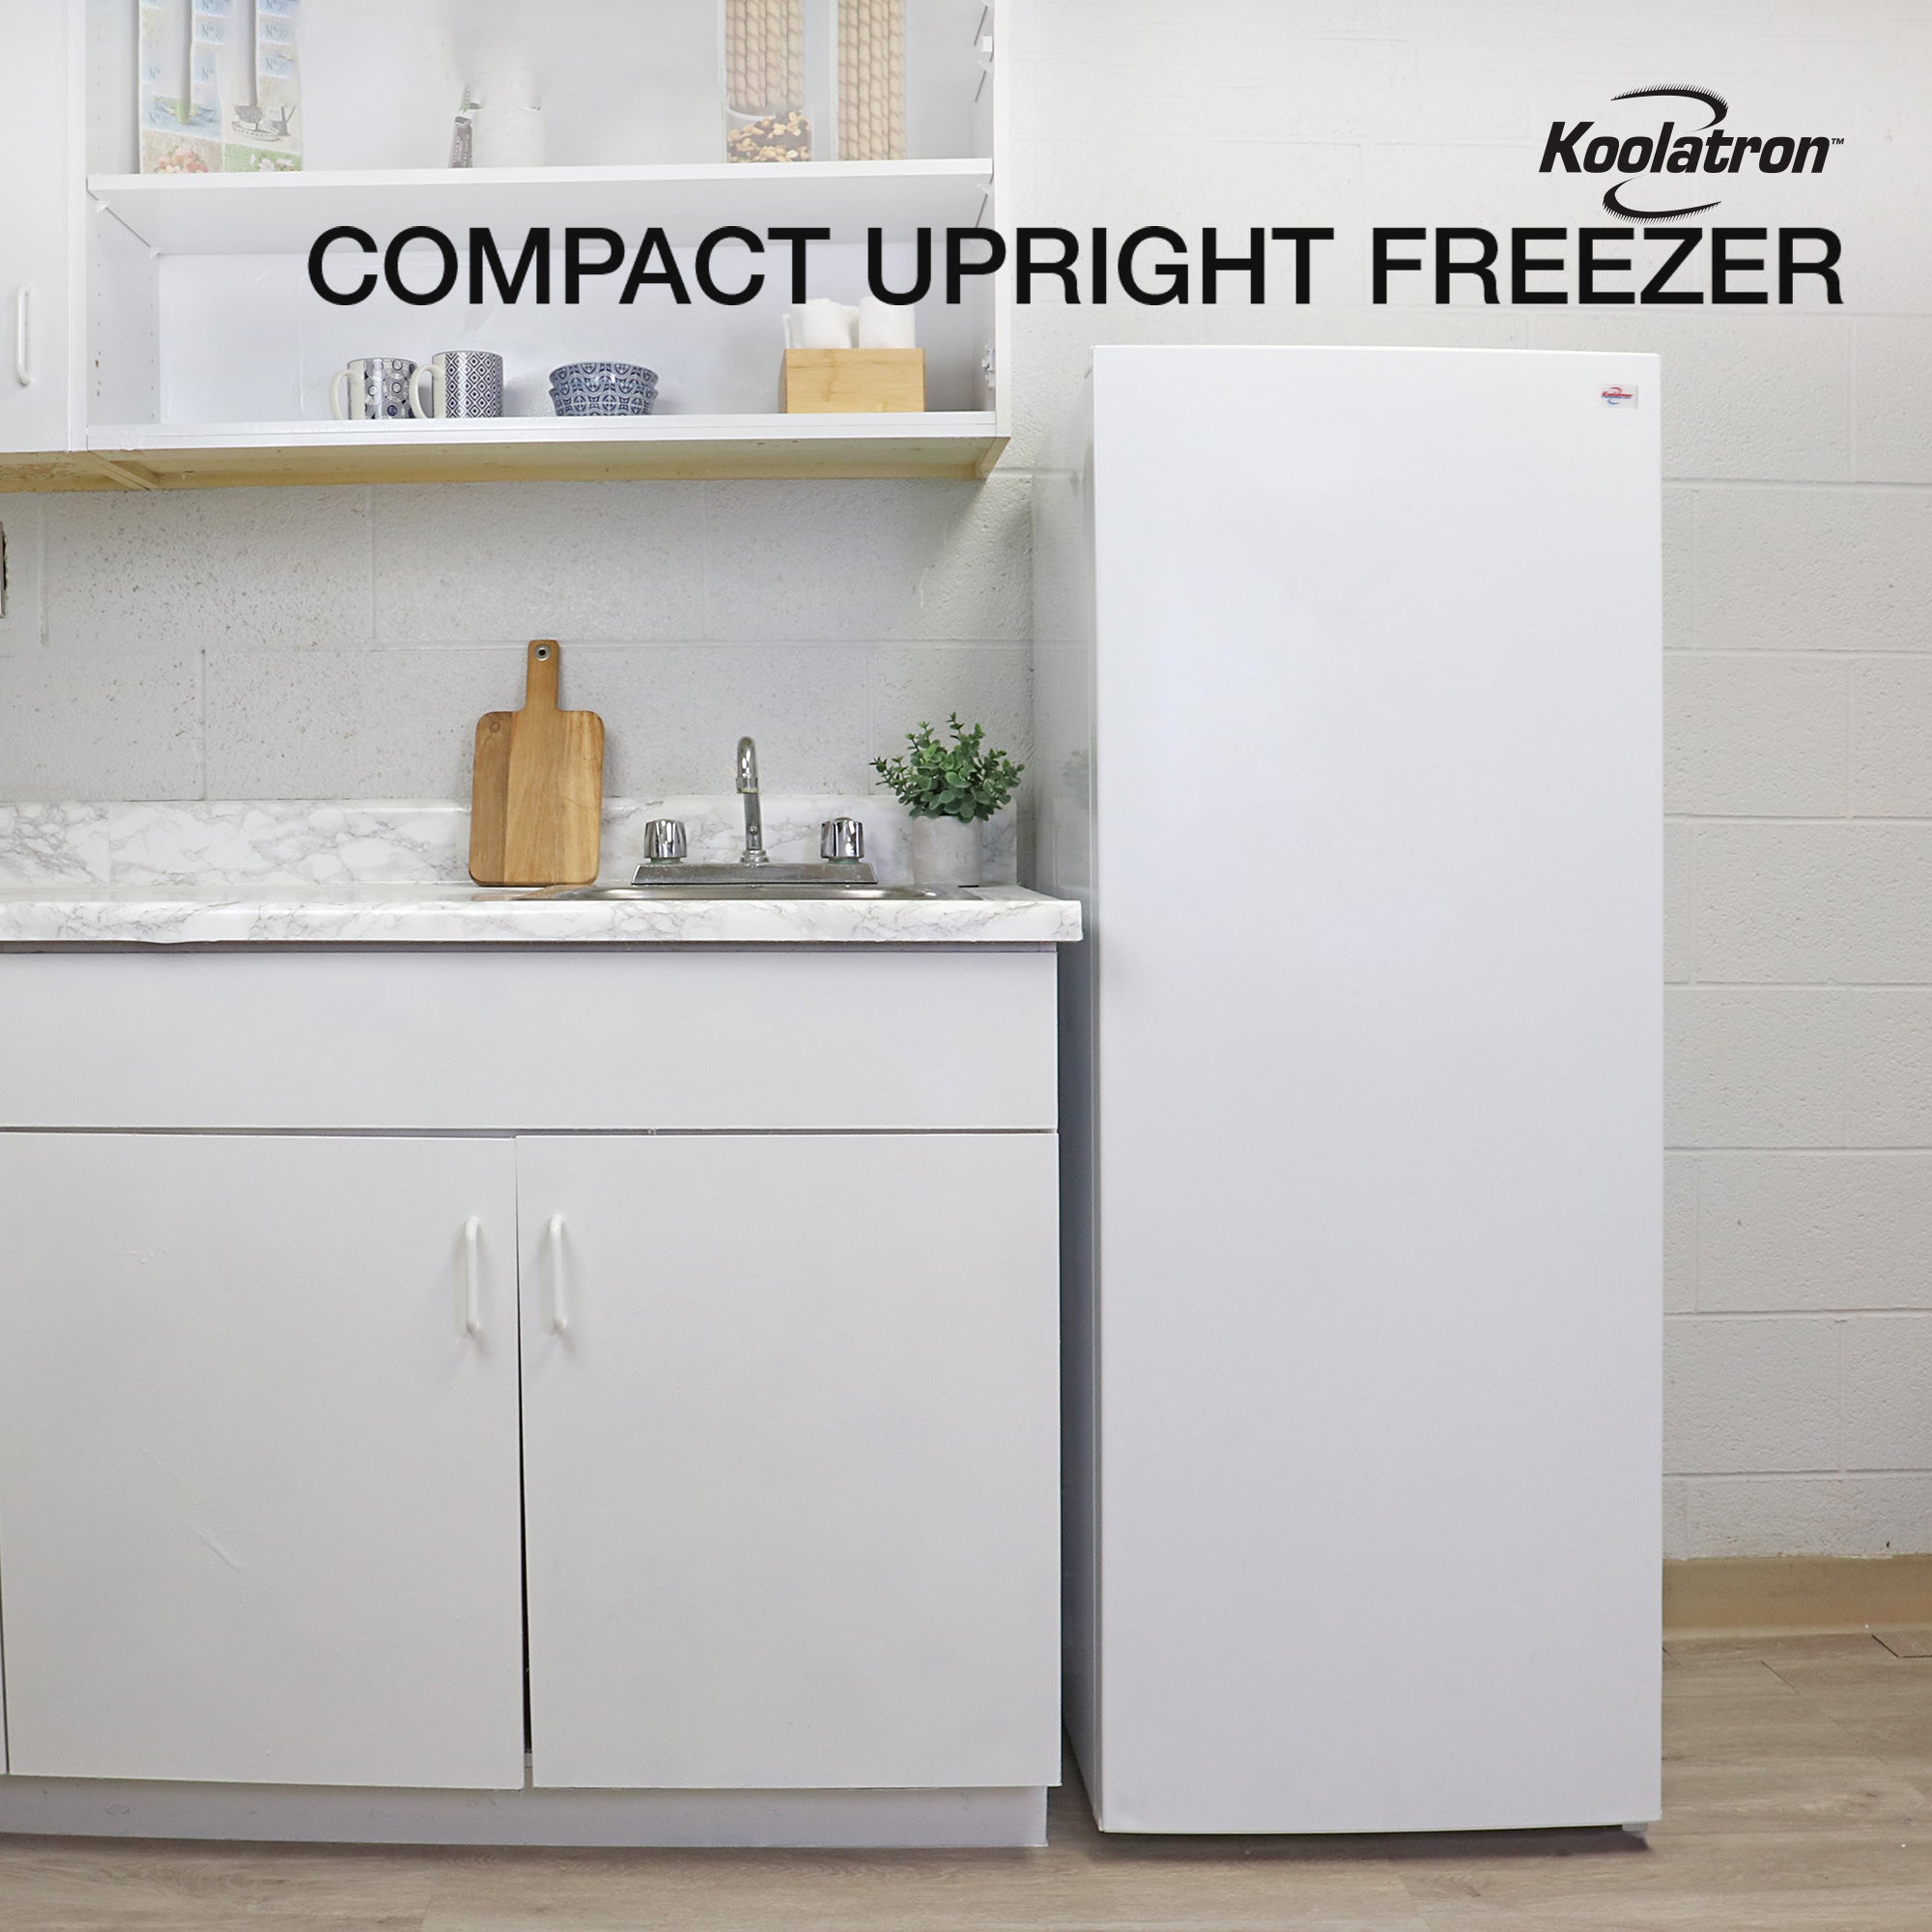 Lifestyle image of upright freezer beside a white kitchen cabinet with white marble countertop. Text above reads "Koolatron compact upright freezer"